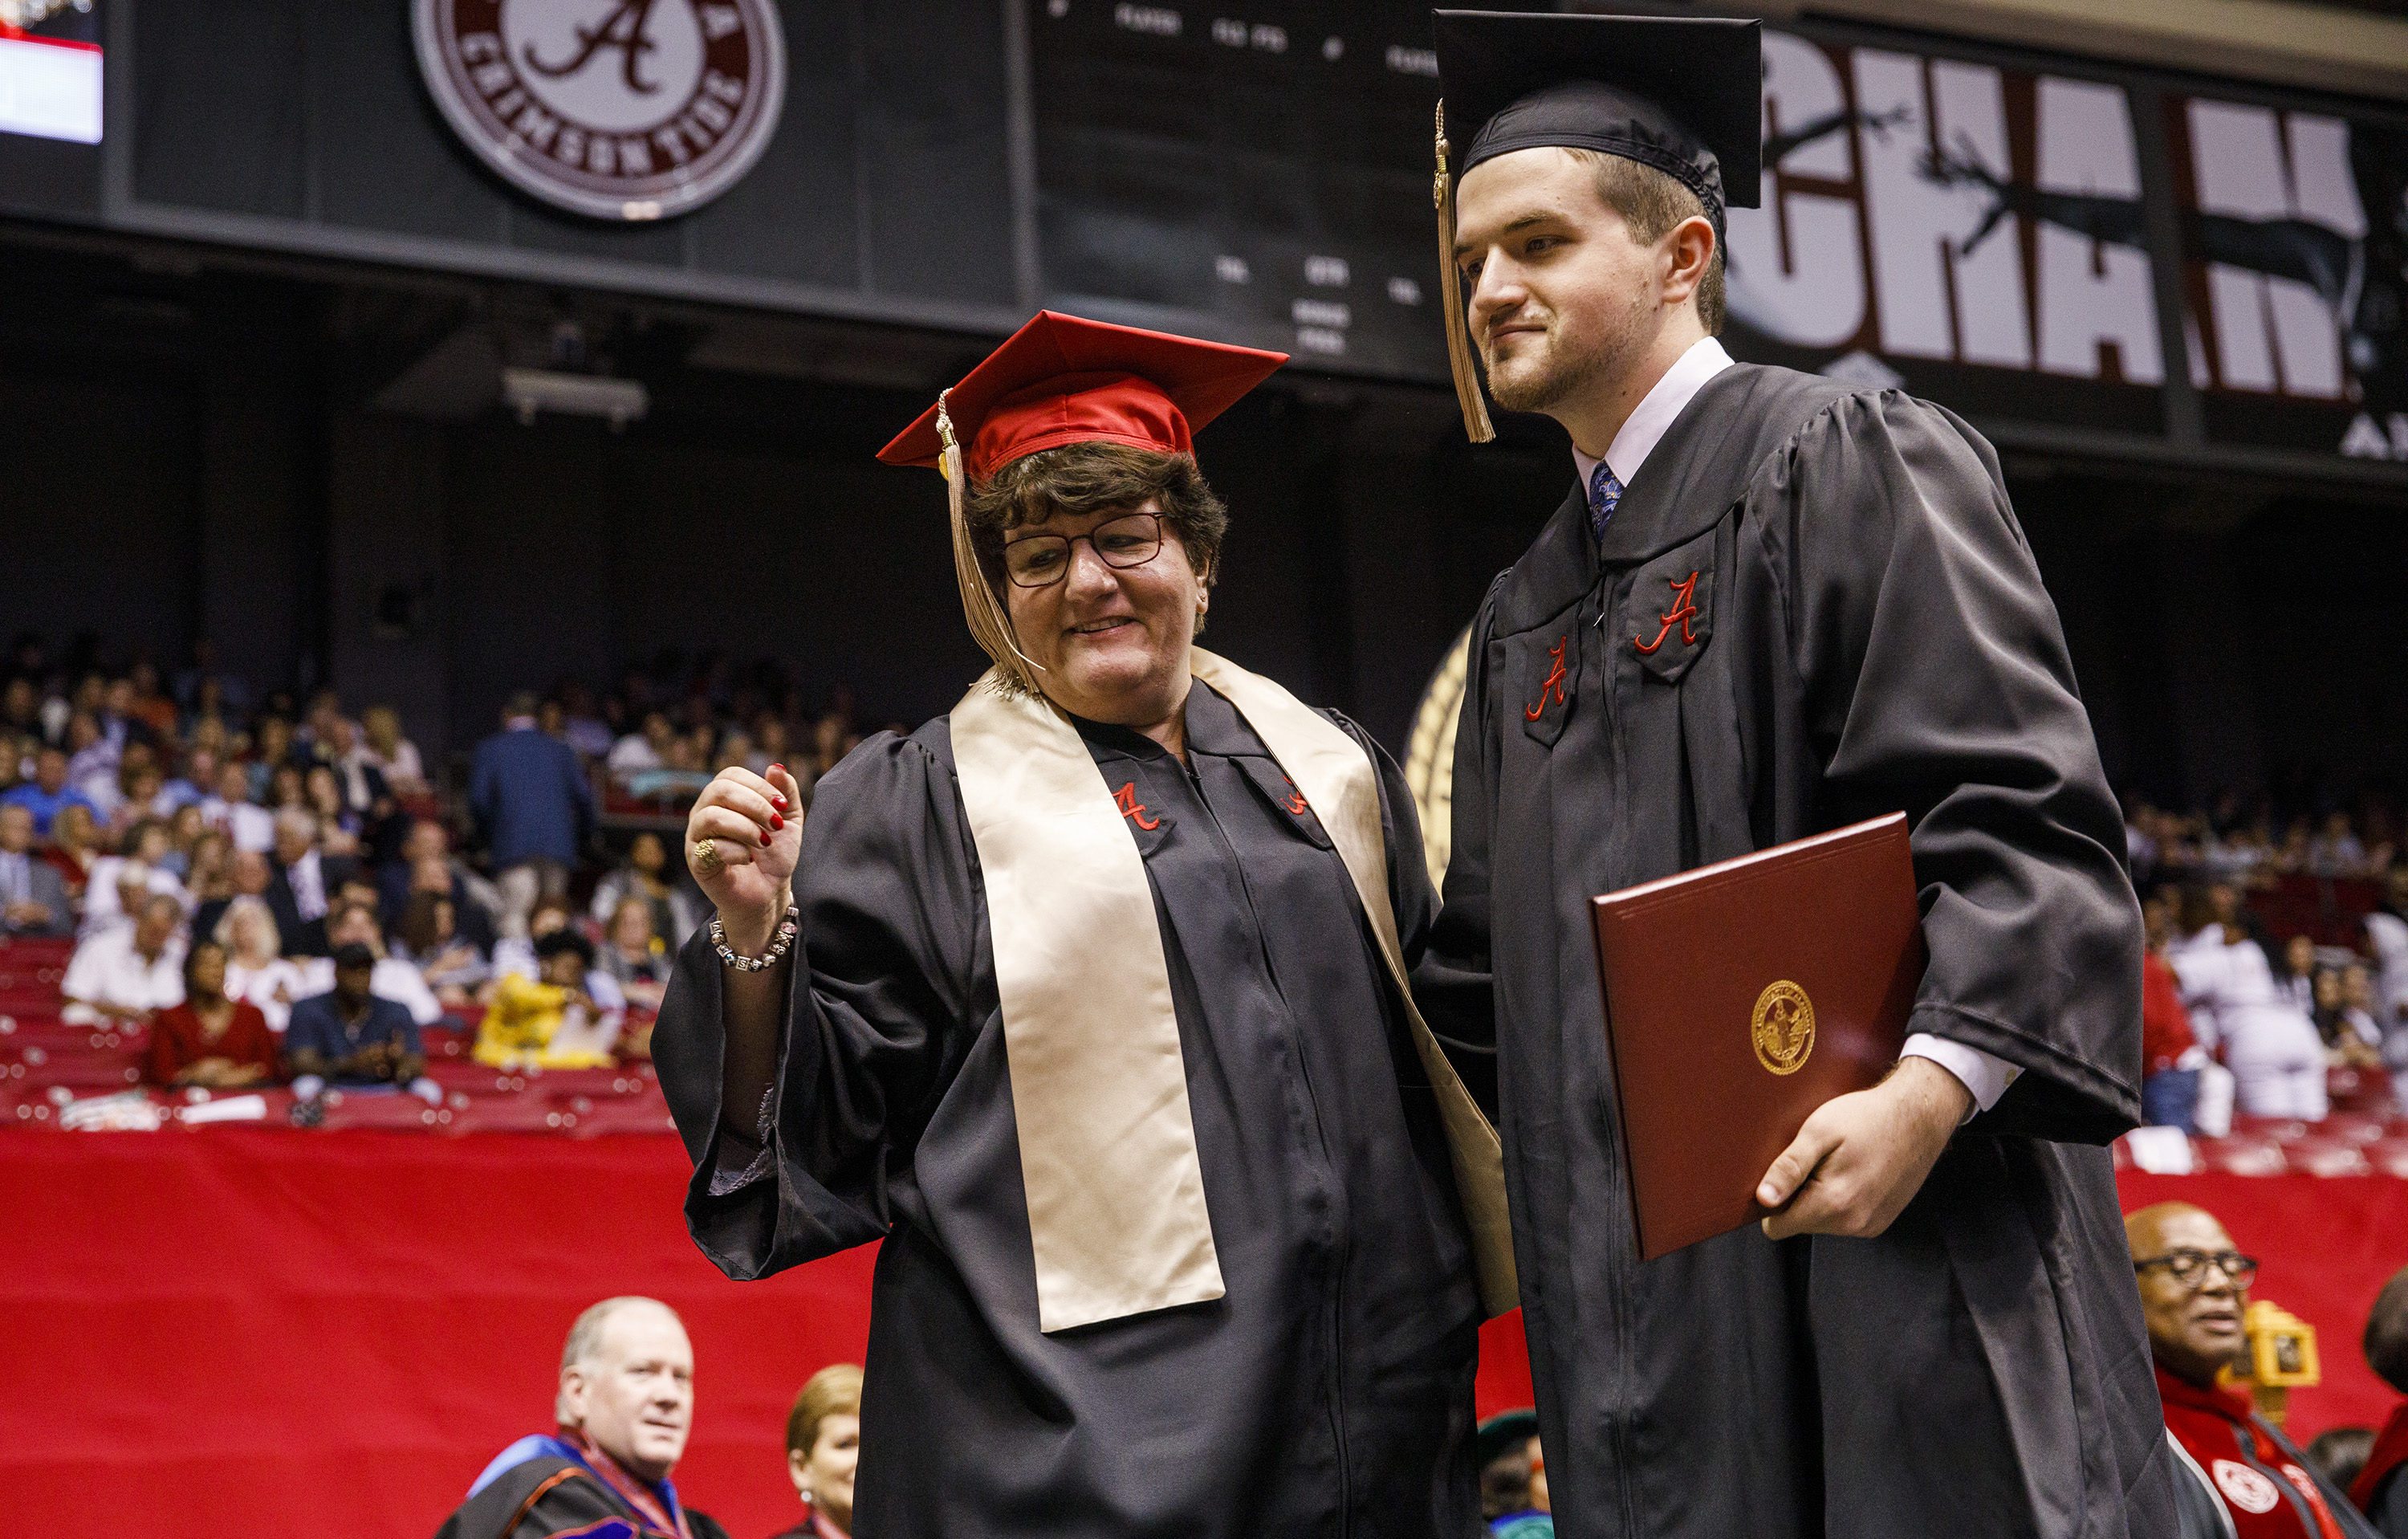 Mother, Son Earn Business Degrees Together